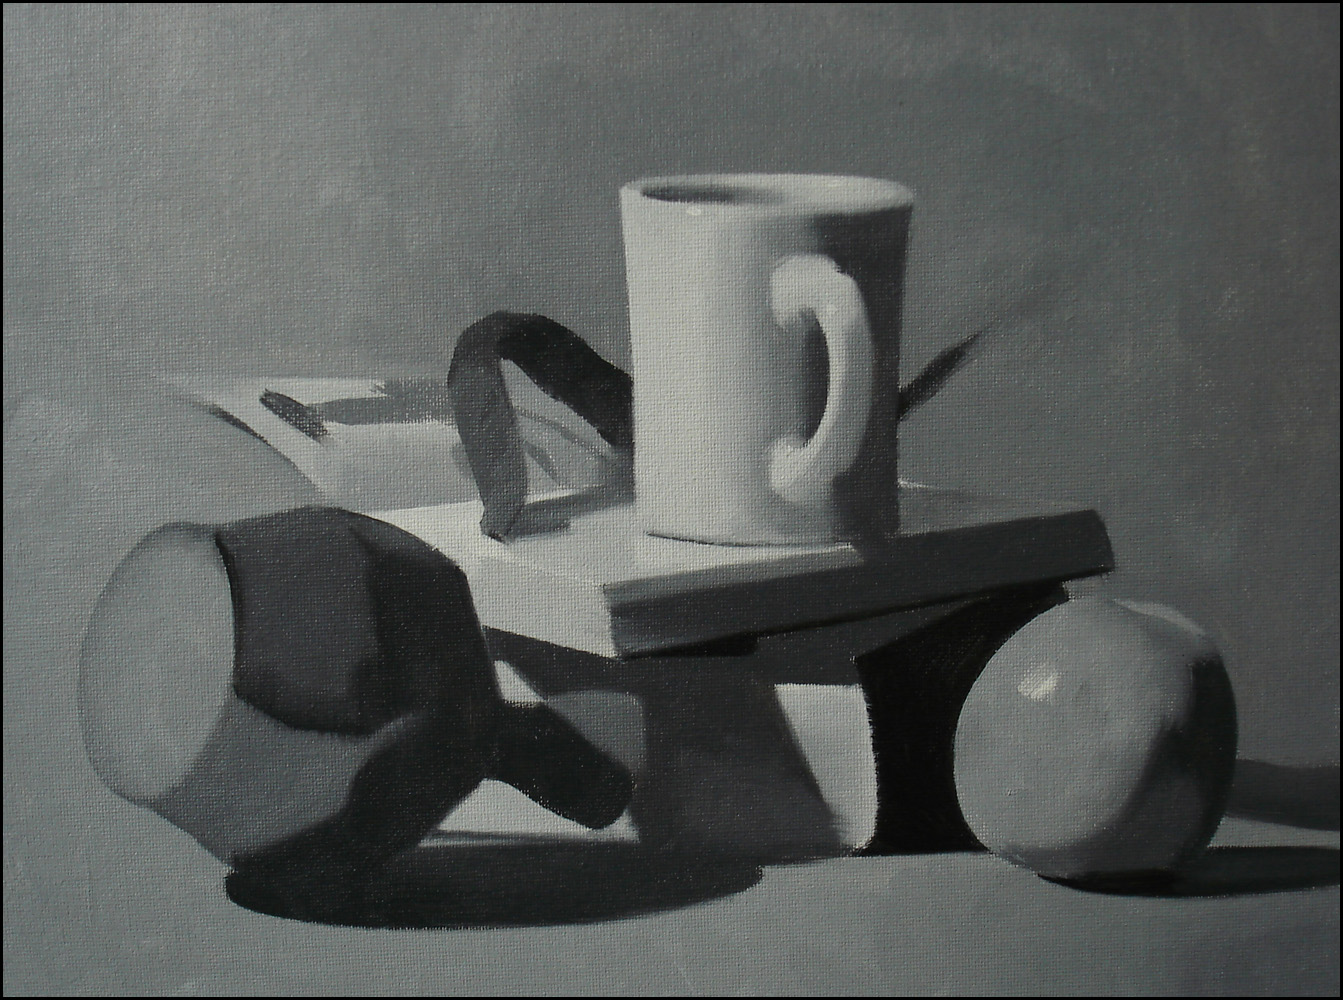 Grisaille Still Life With Mug, 9x12 inches